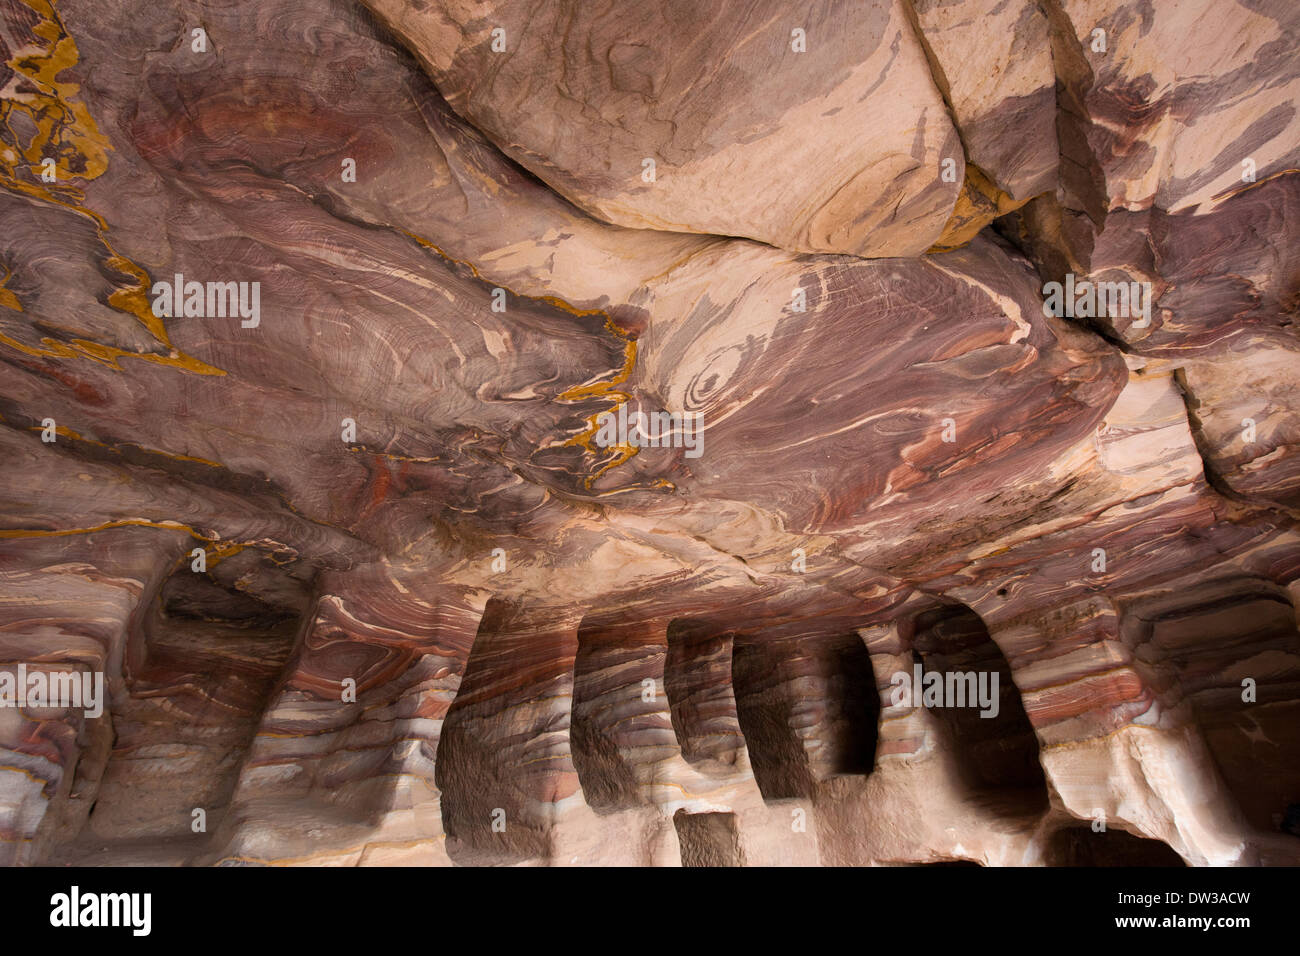 Interior of a carved tomb in the Street of Façades, showing the rock formations, Petra, Jordan Stock Photo